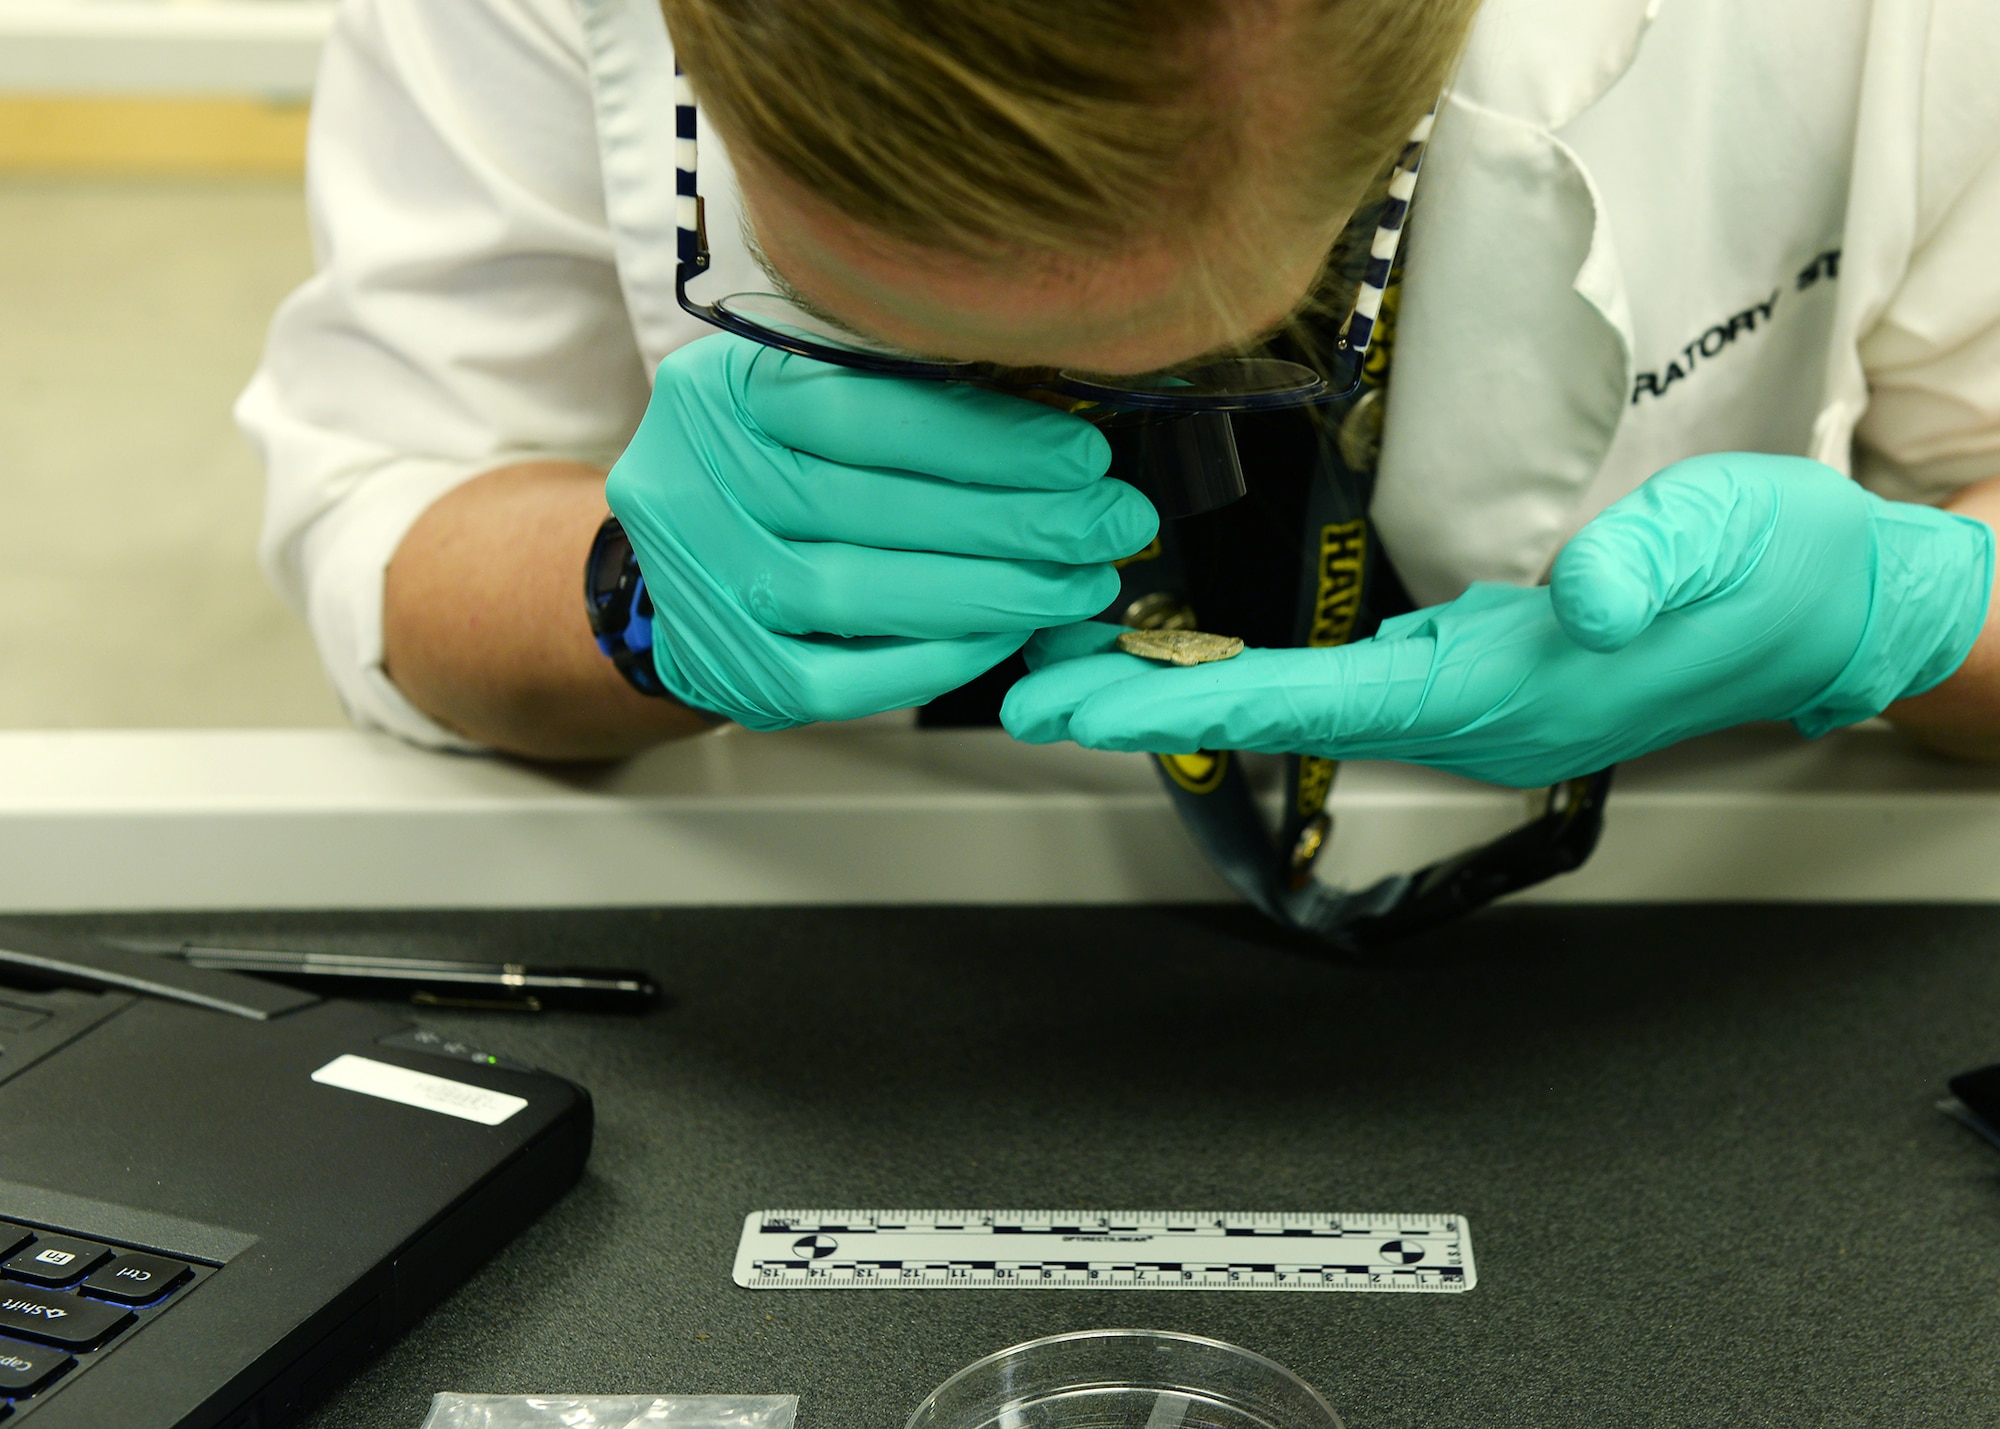 A doctor in a laboratory examines material evidence with a hand held magnifying glass.